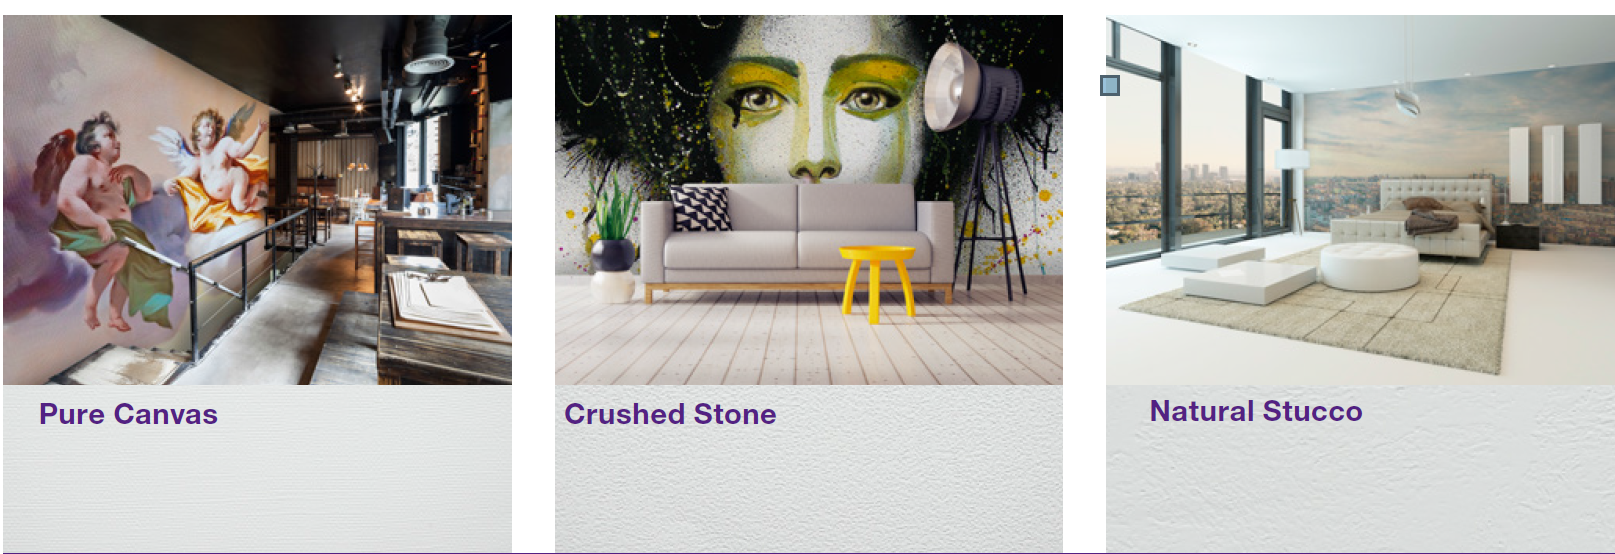 Avery Dennison MPI2600 Crush Stone, Pure Canvas, Natural Stucco Textured Calendered Wall Vinyl